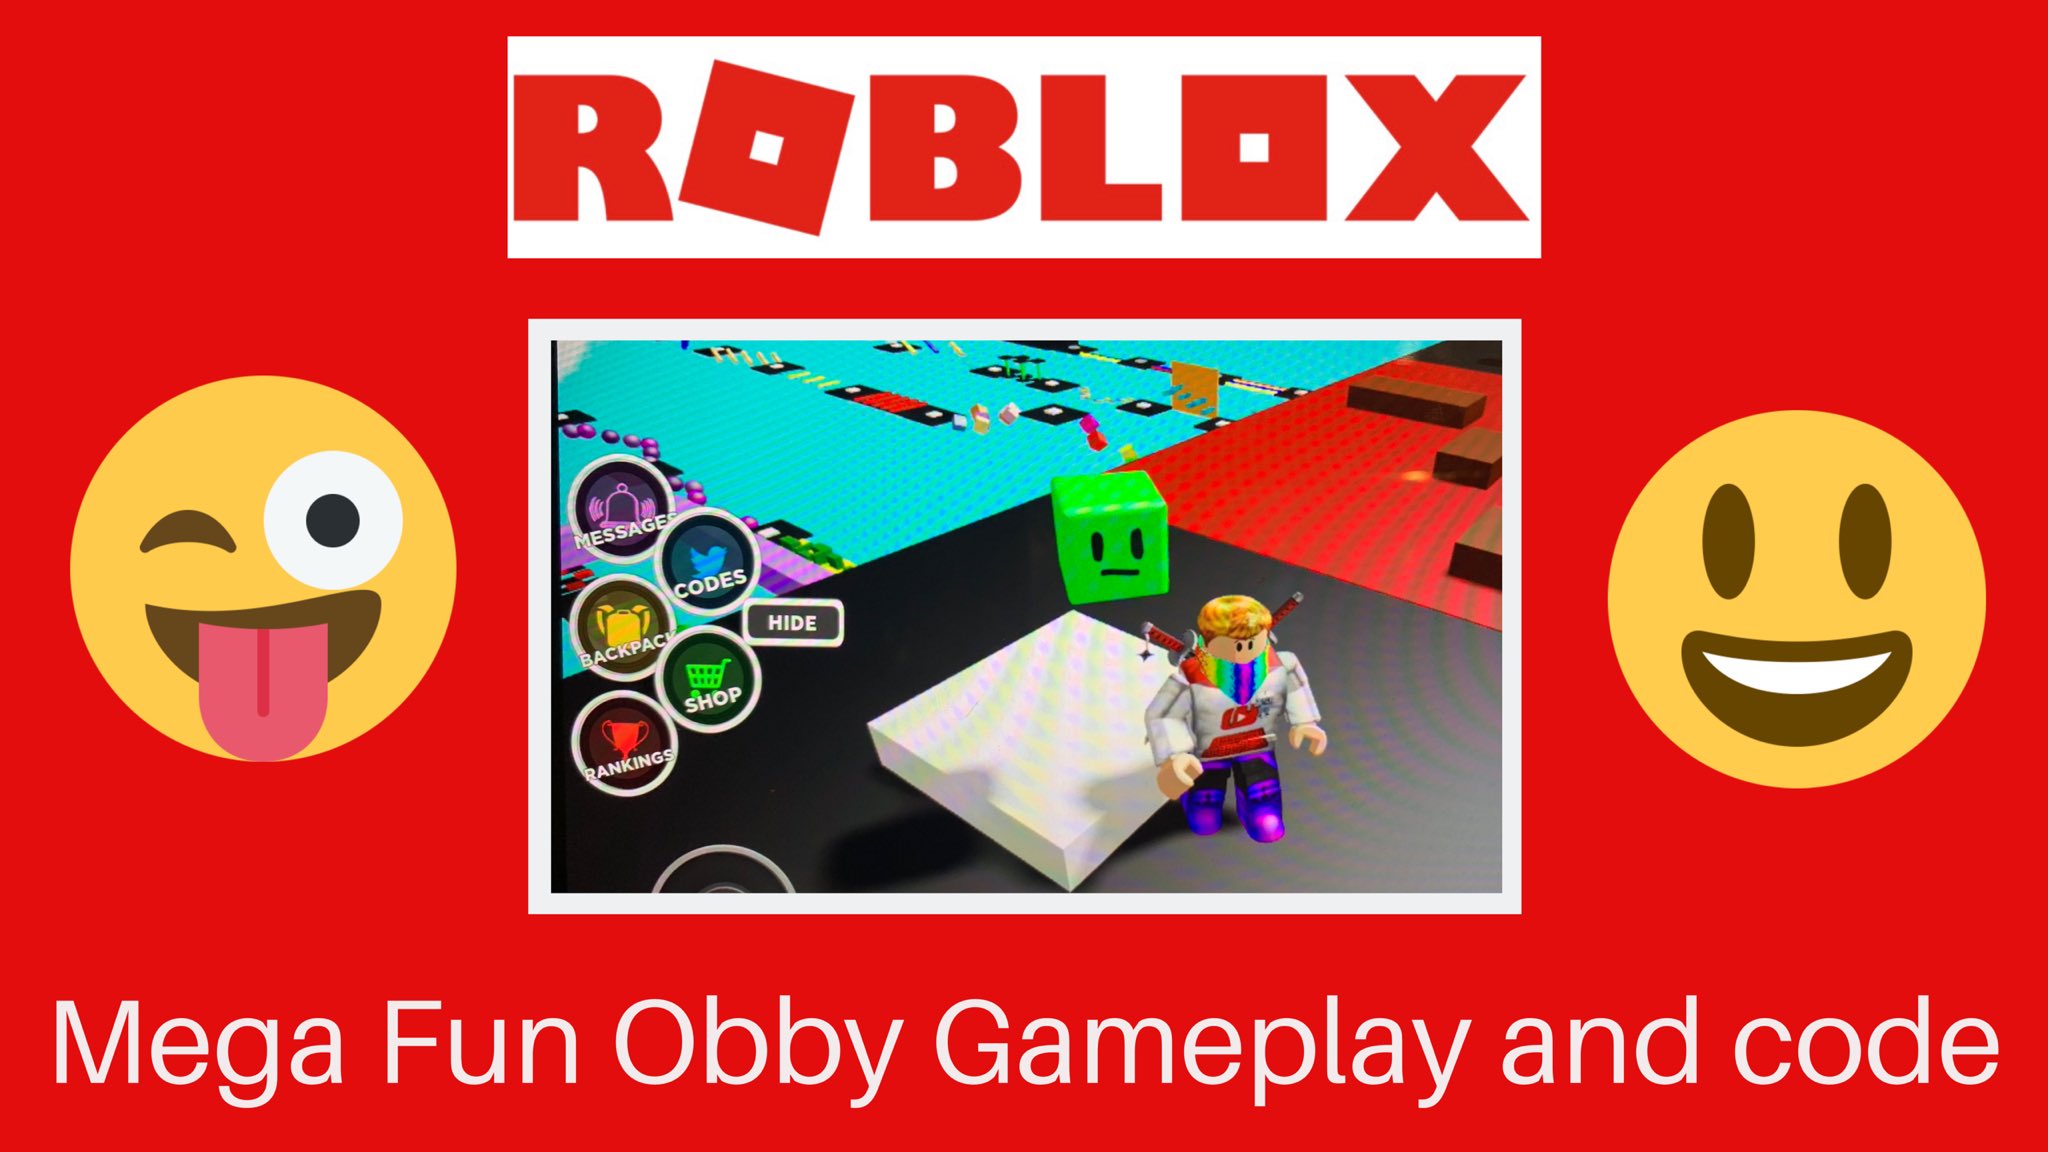 Deathbotbrothers On Twitter Roblox Mega Fun Obby Gameplay And Code Gameplay Talk Through And A Co Https T Co Qcyqb3ibze Via Youtube Roblox Megafunobby Robloxmegafunobby Robloxcode Robloxgameplay Robloxgames Https T Co Hdiriznsxu - roblox long obby wallpaper